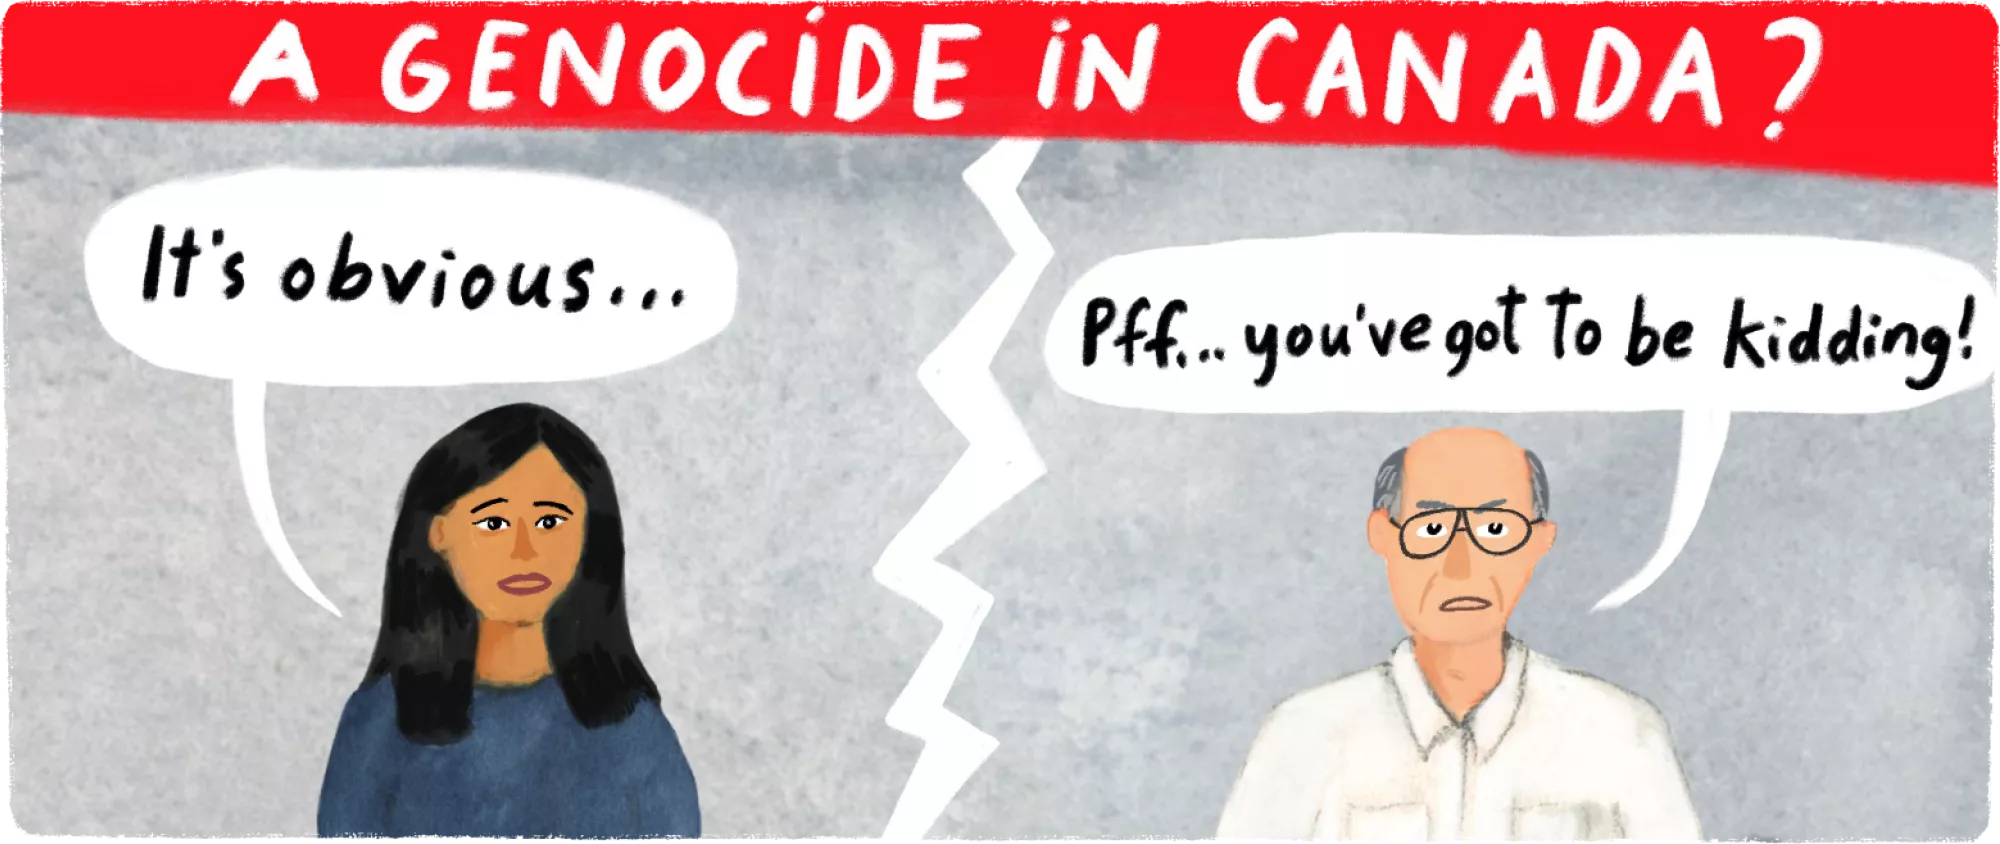 Genocide in Canada? Two people of different demographics argue in illustration:It's obvious... Pff you've got to be kidding!